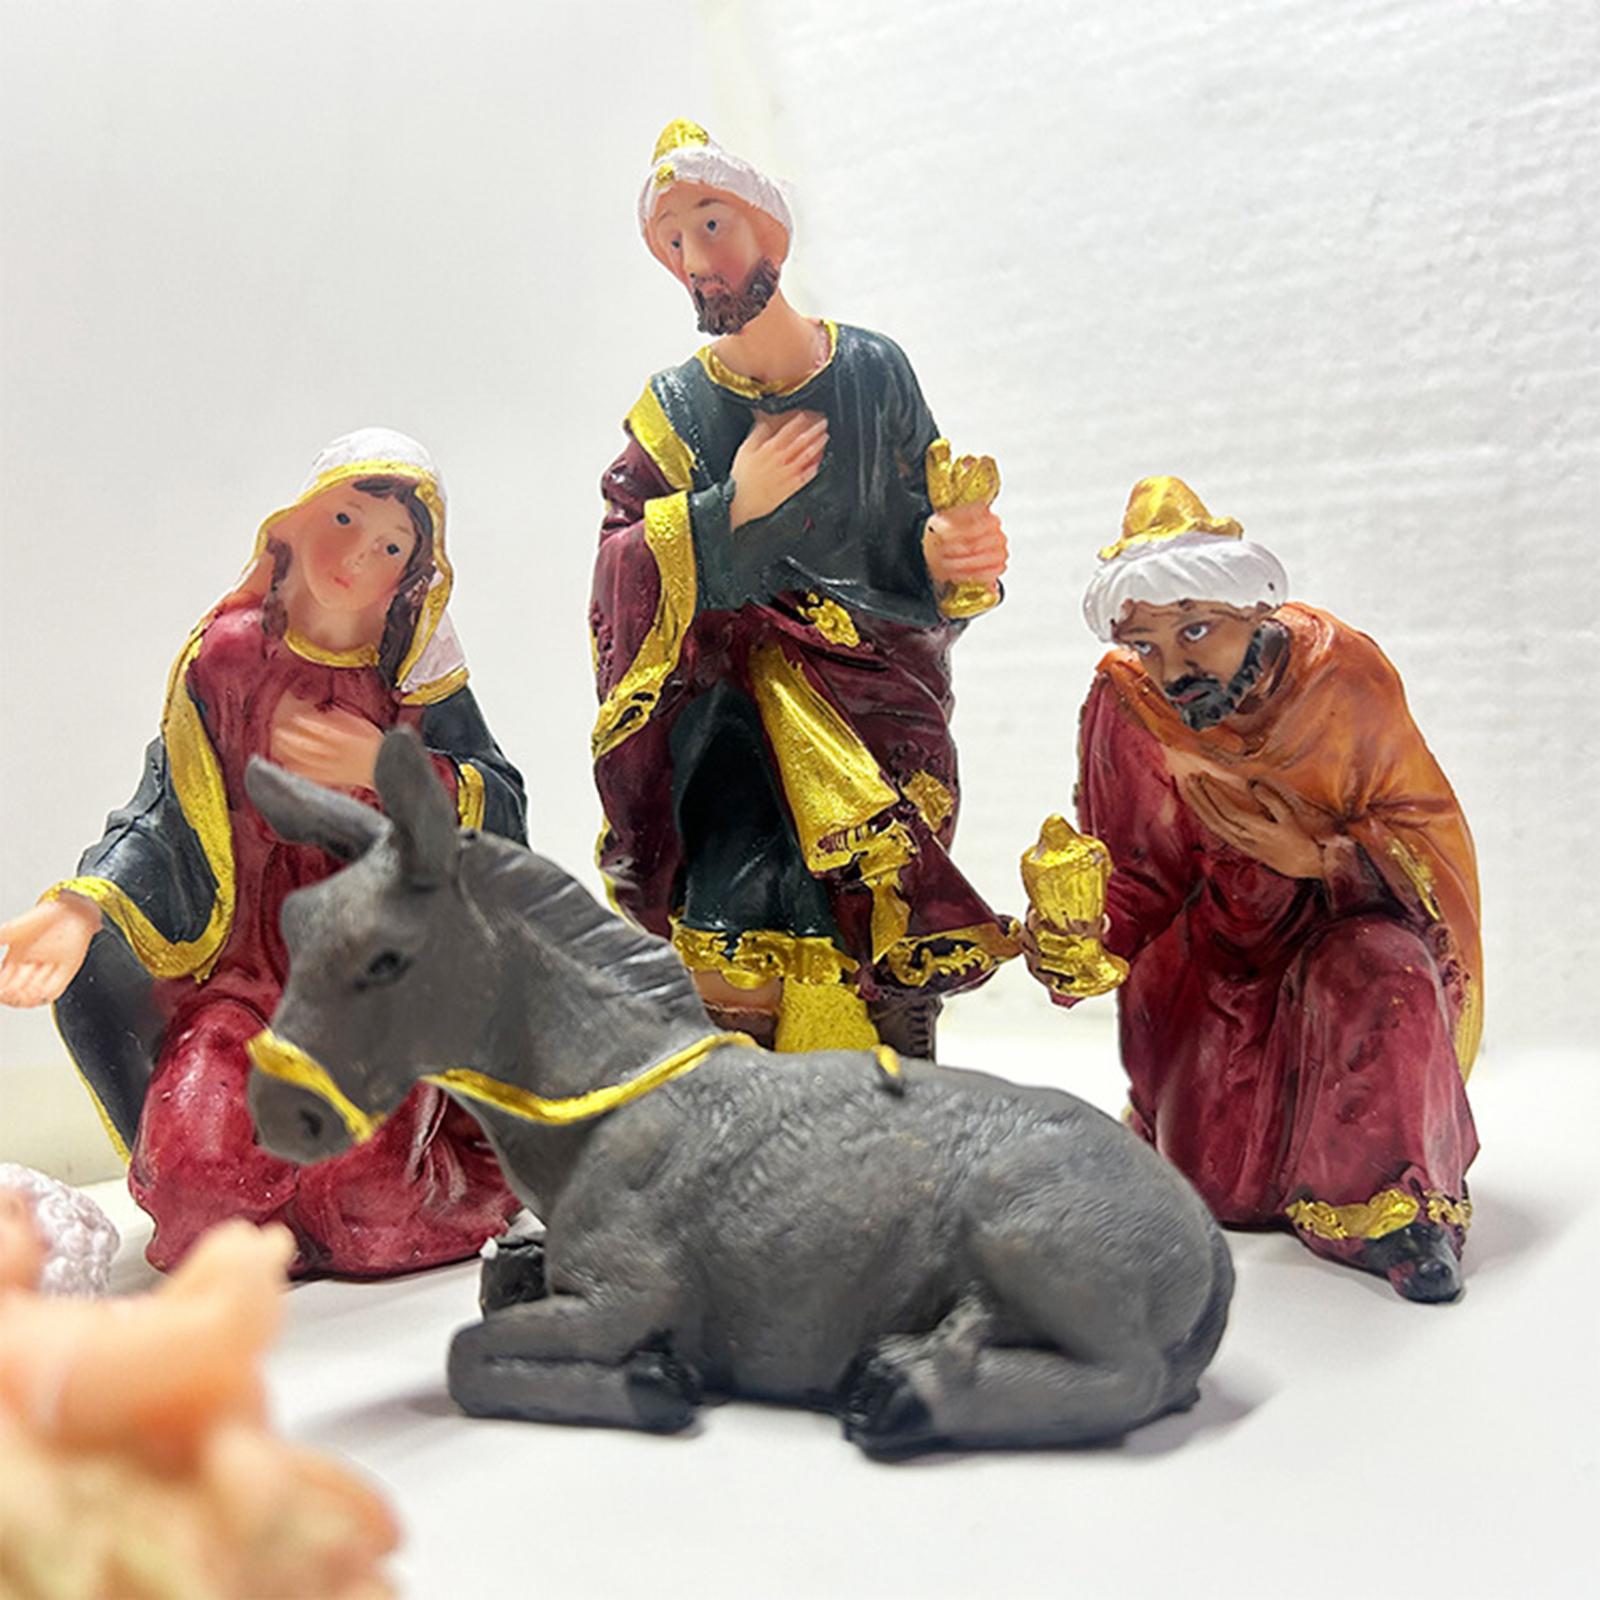 11x Nativity Scene Figures Home Religious Decor Layout Crafts Vintage Style